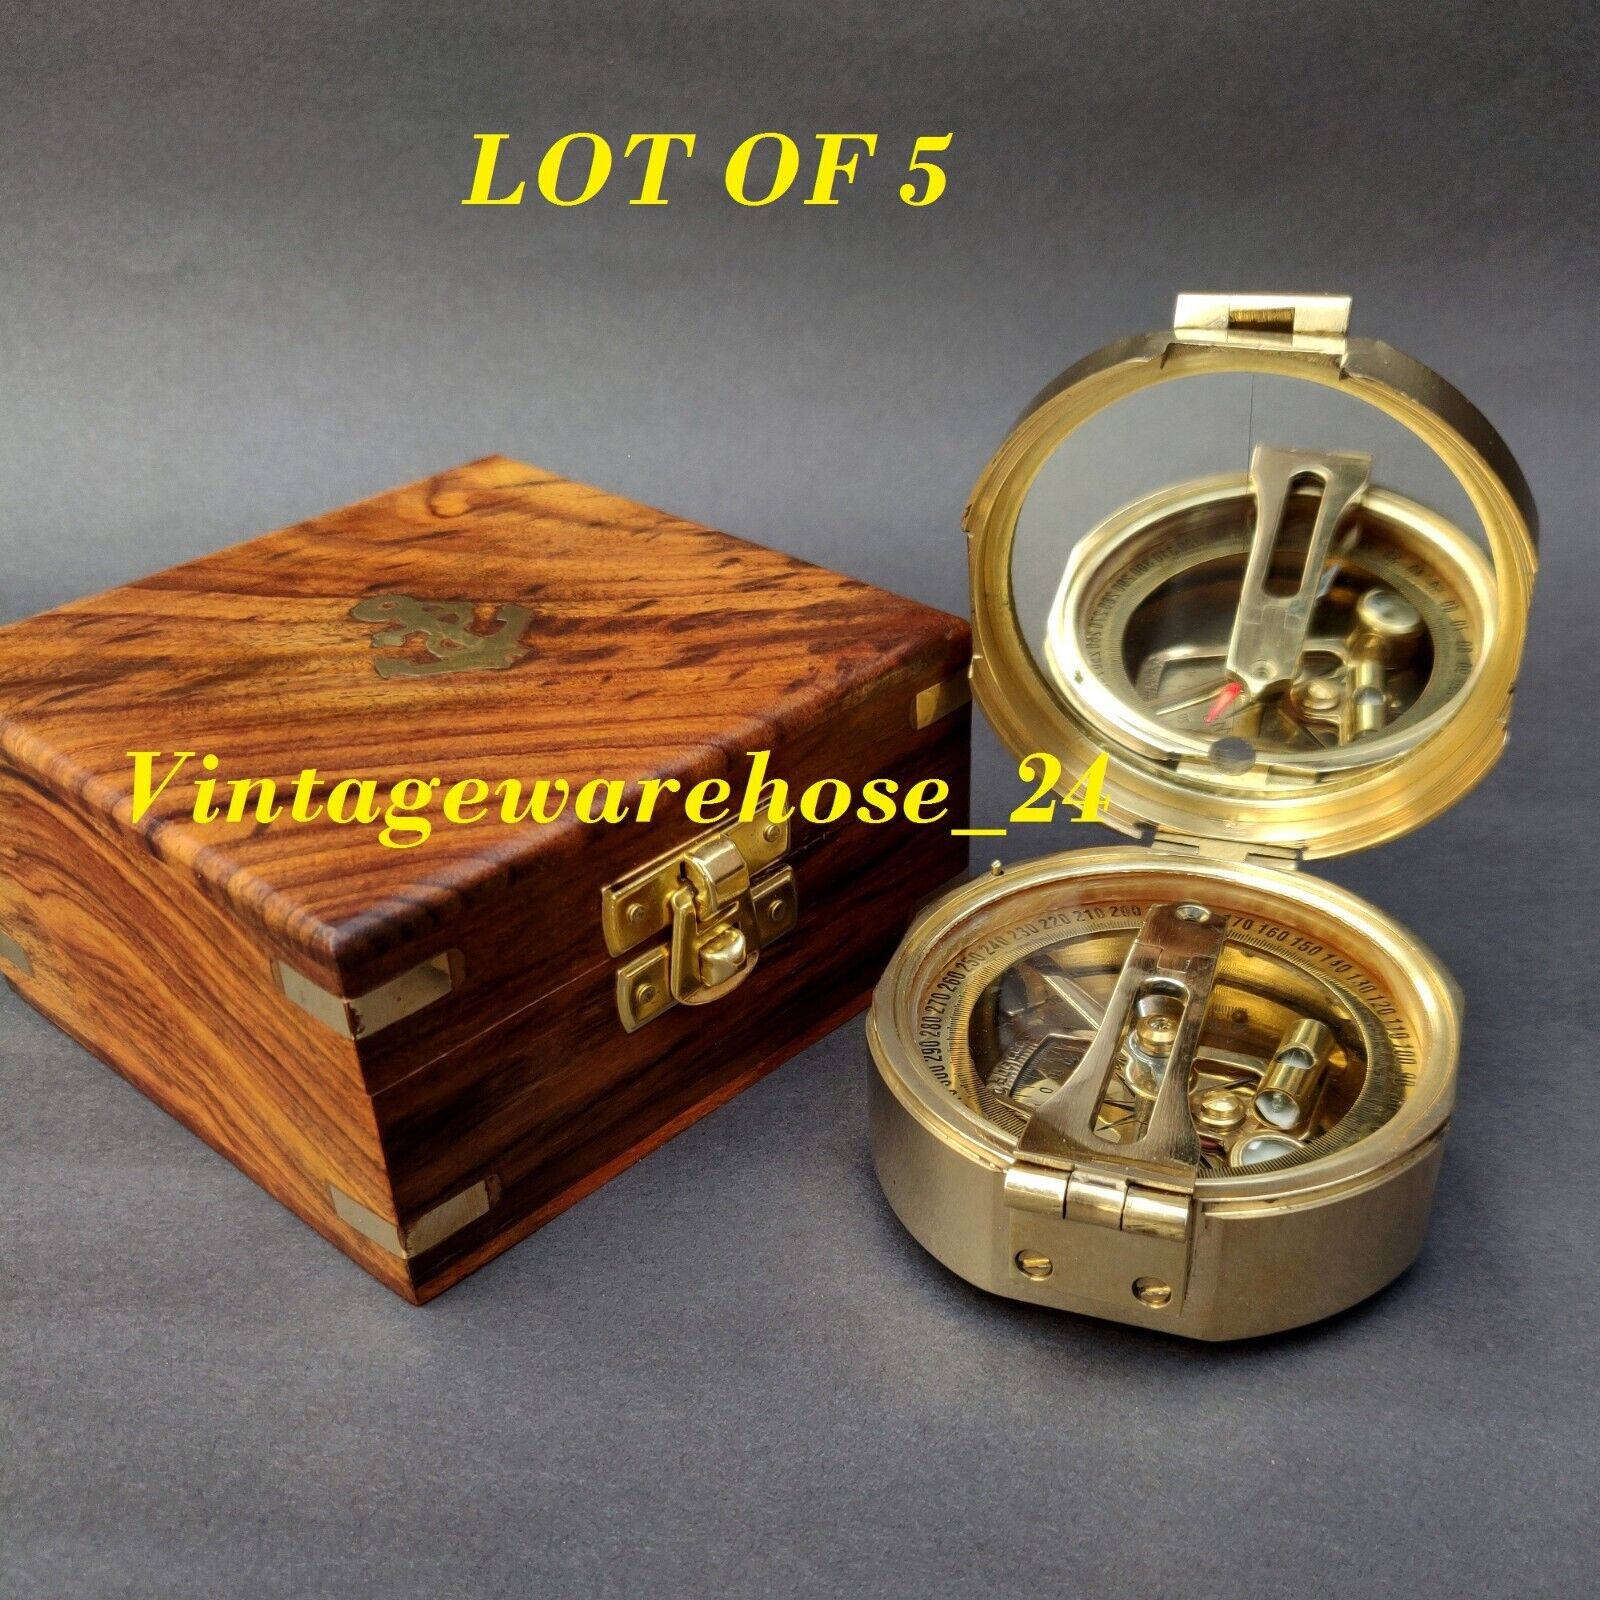 NAUTICAL BRUNTON BRASS COMPASS STANLEY LONDON COMPASS WITH WOODEN BOX LOT OF 5  